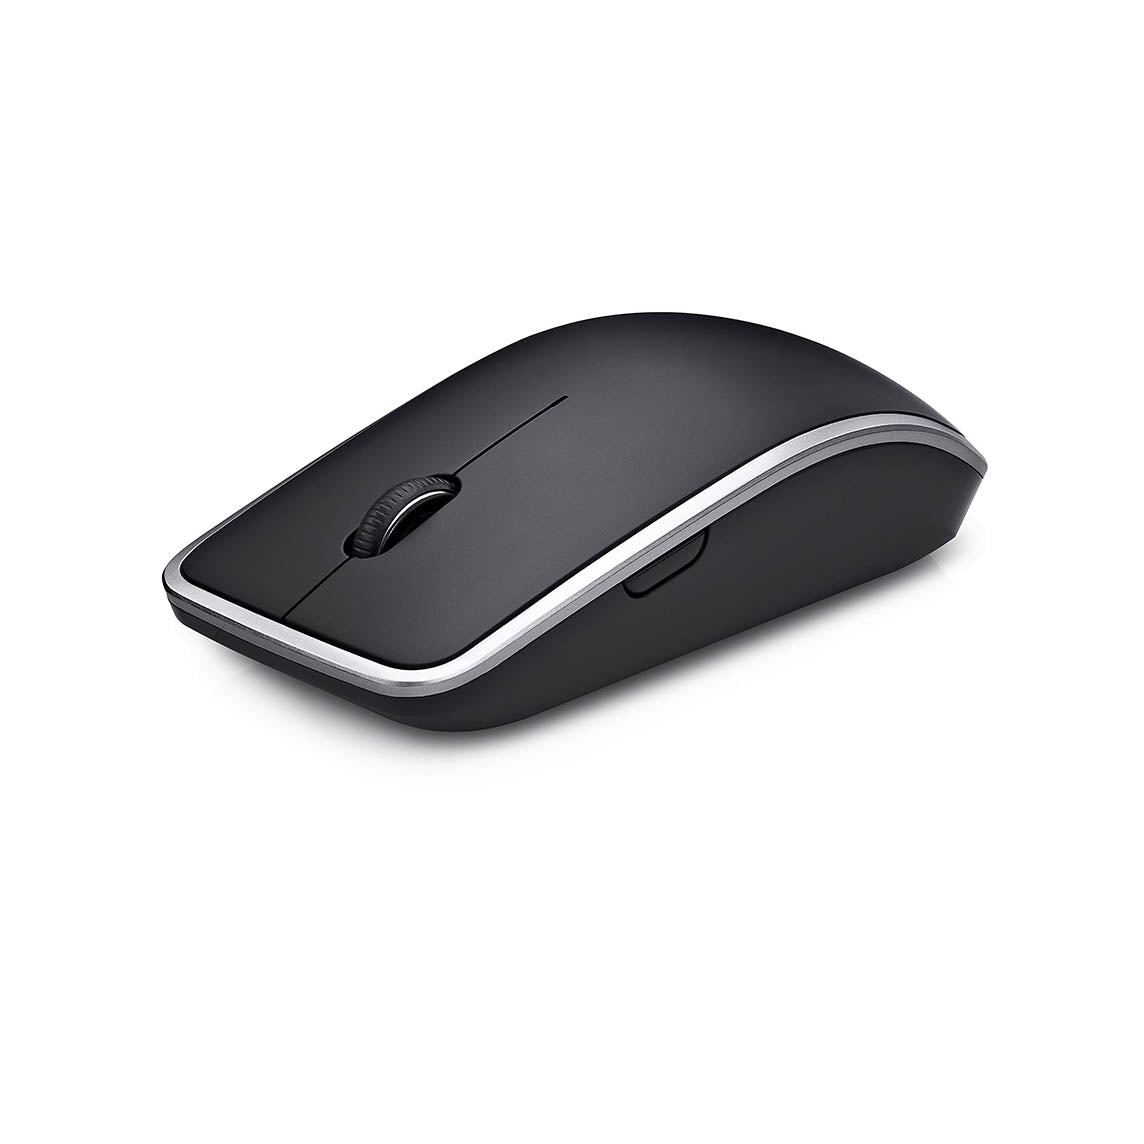 Dell WM514p Wireless Mouse - Refurbished